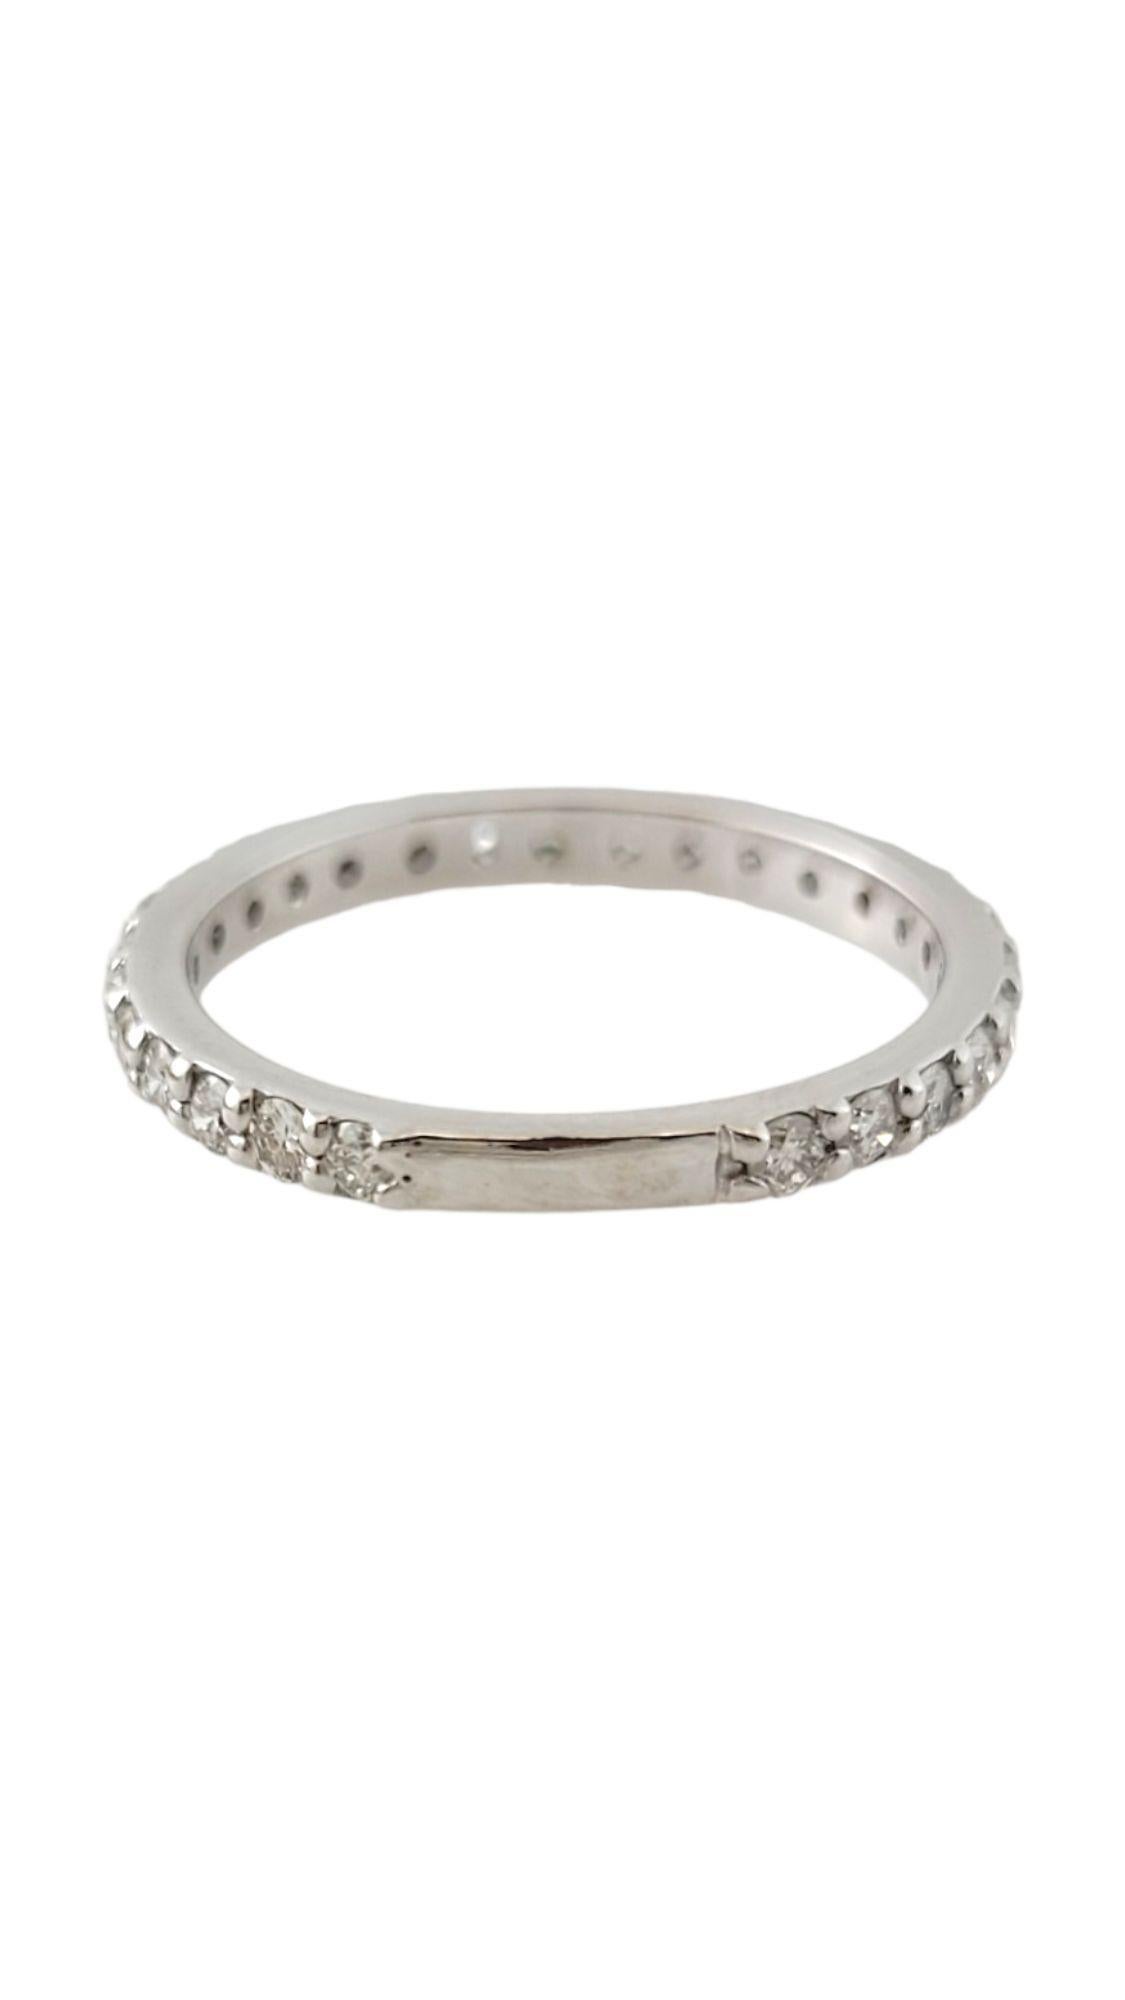 14K White Gold Diamond Band Size 5.75 #15017 In Good Condition For Sale In Washington Depot, CT